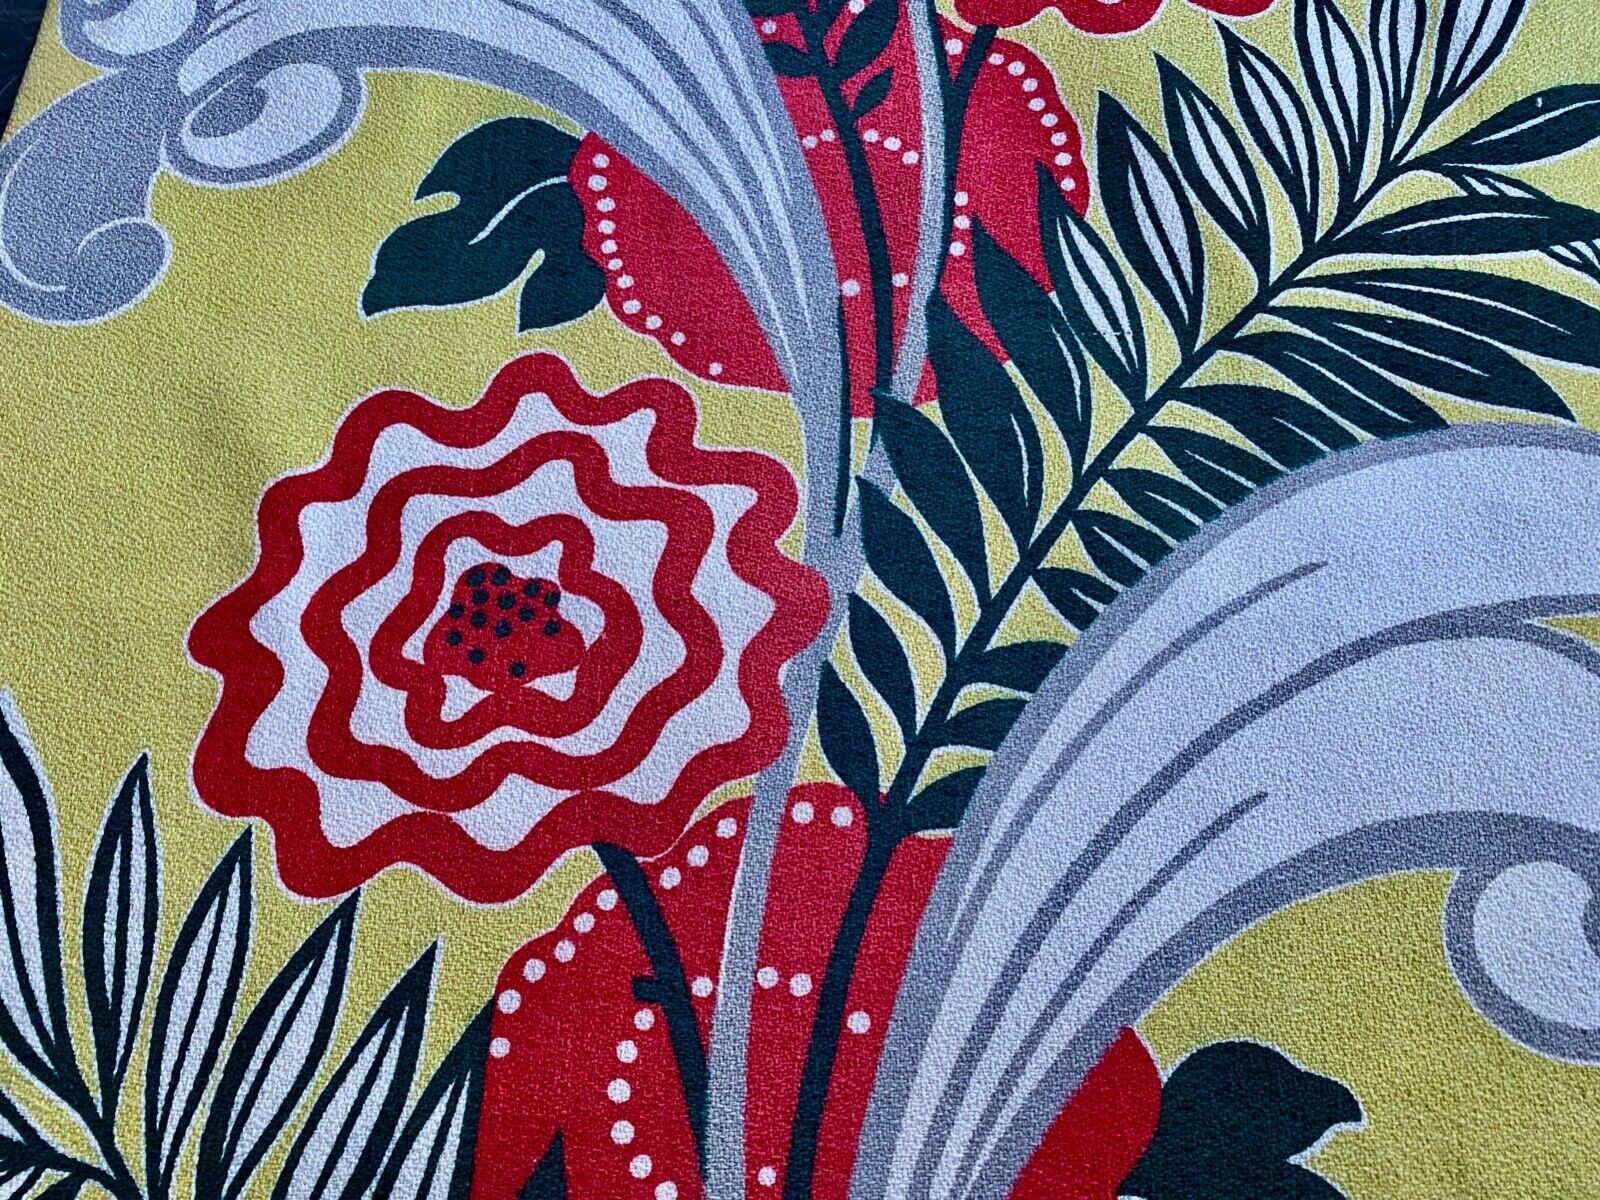 SWANK Art Deco 1930's Iconic PLUMES Abstract Floral Barkcloth Vintage Fabric